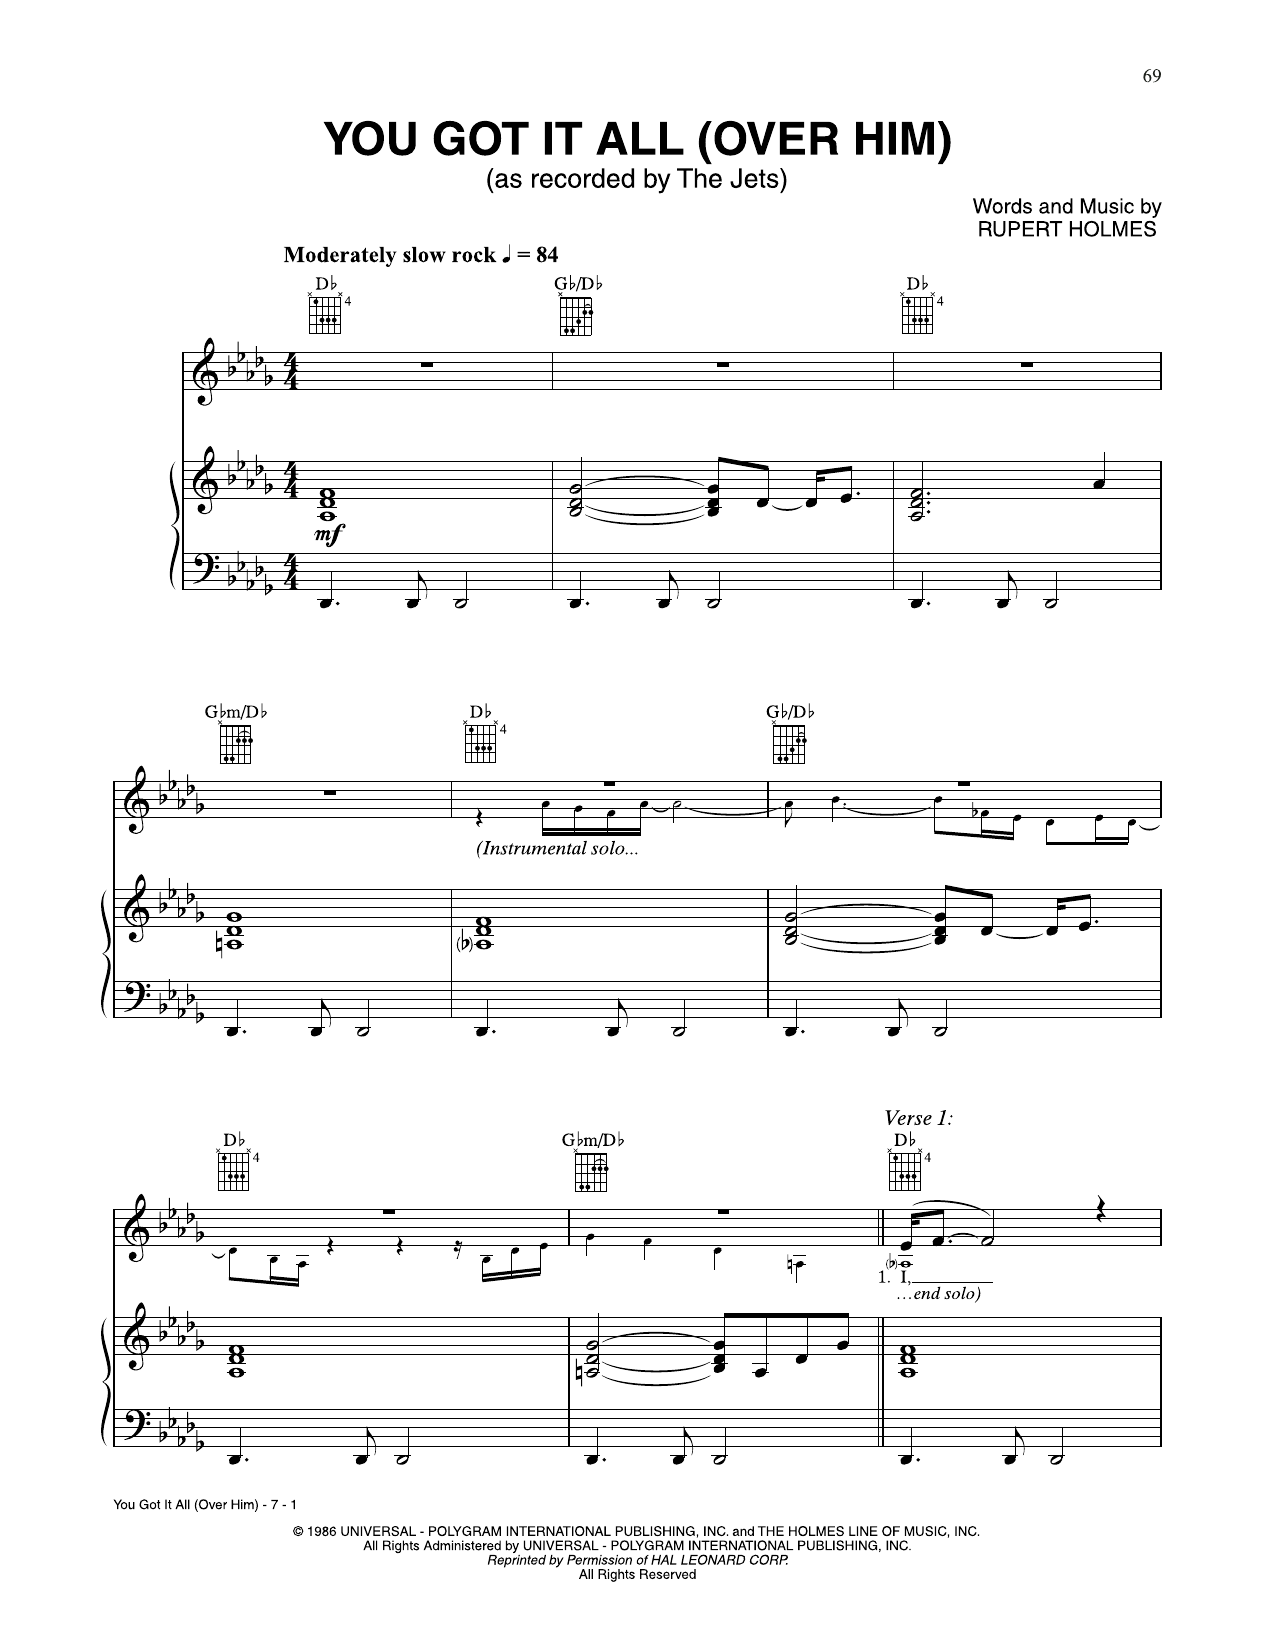 Download The Jets You Got It All (Over Him) Sheet Music